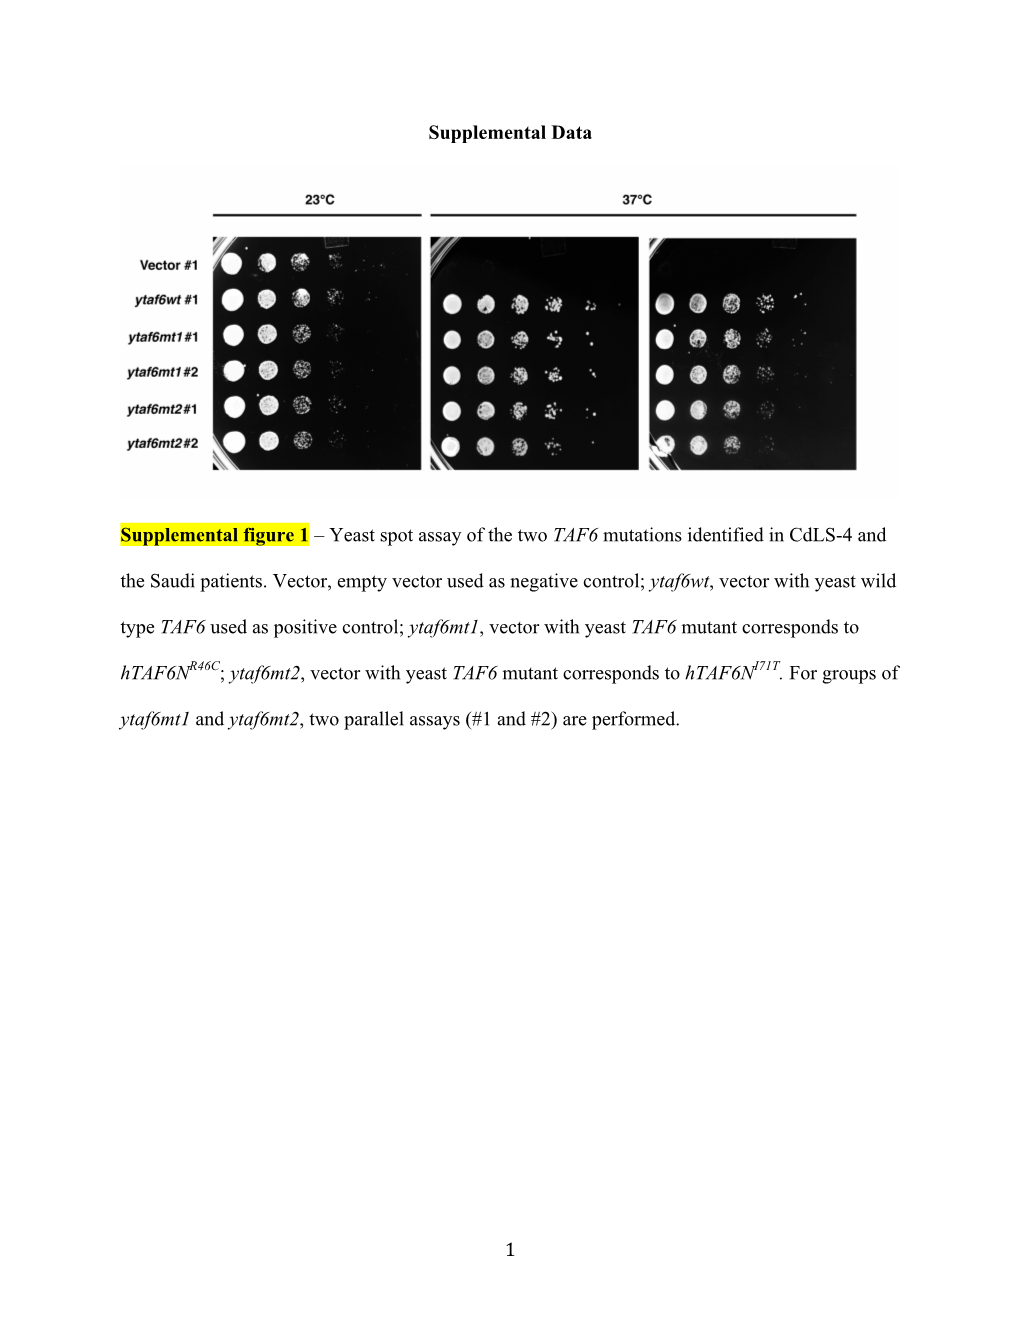 Yeast Spot Assay of the Two TAF6 Mutations Identified in Cdls-4 and the Saudi Patients